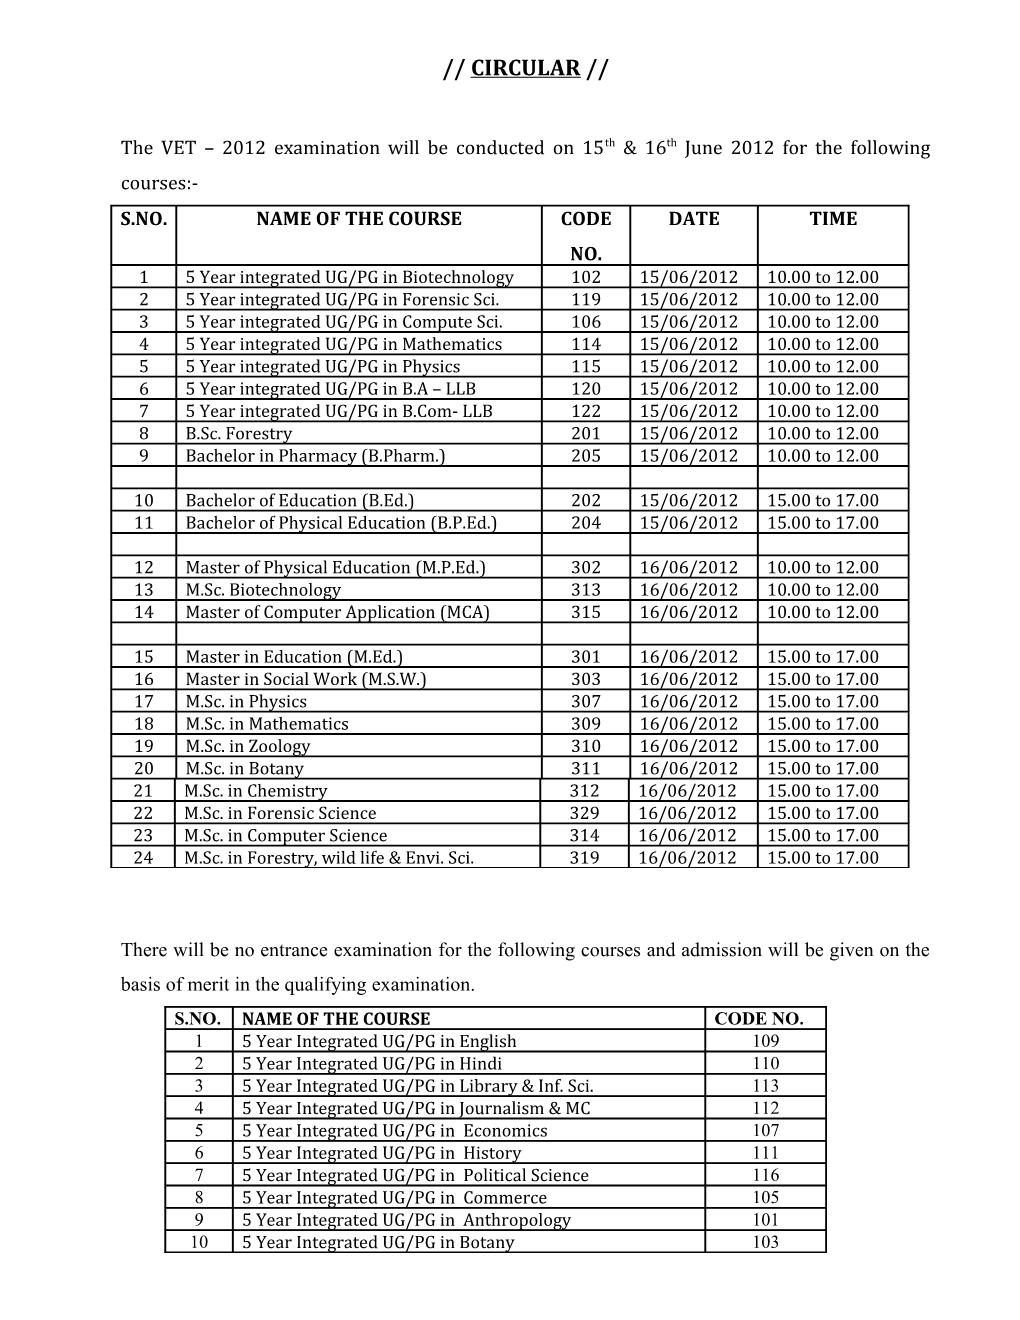 The VET 2012 Examination Will Be Conducted on 15Th & 16Th June 2012 for the Following Courses